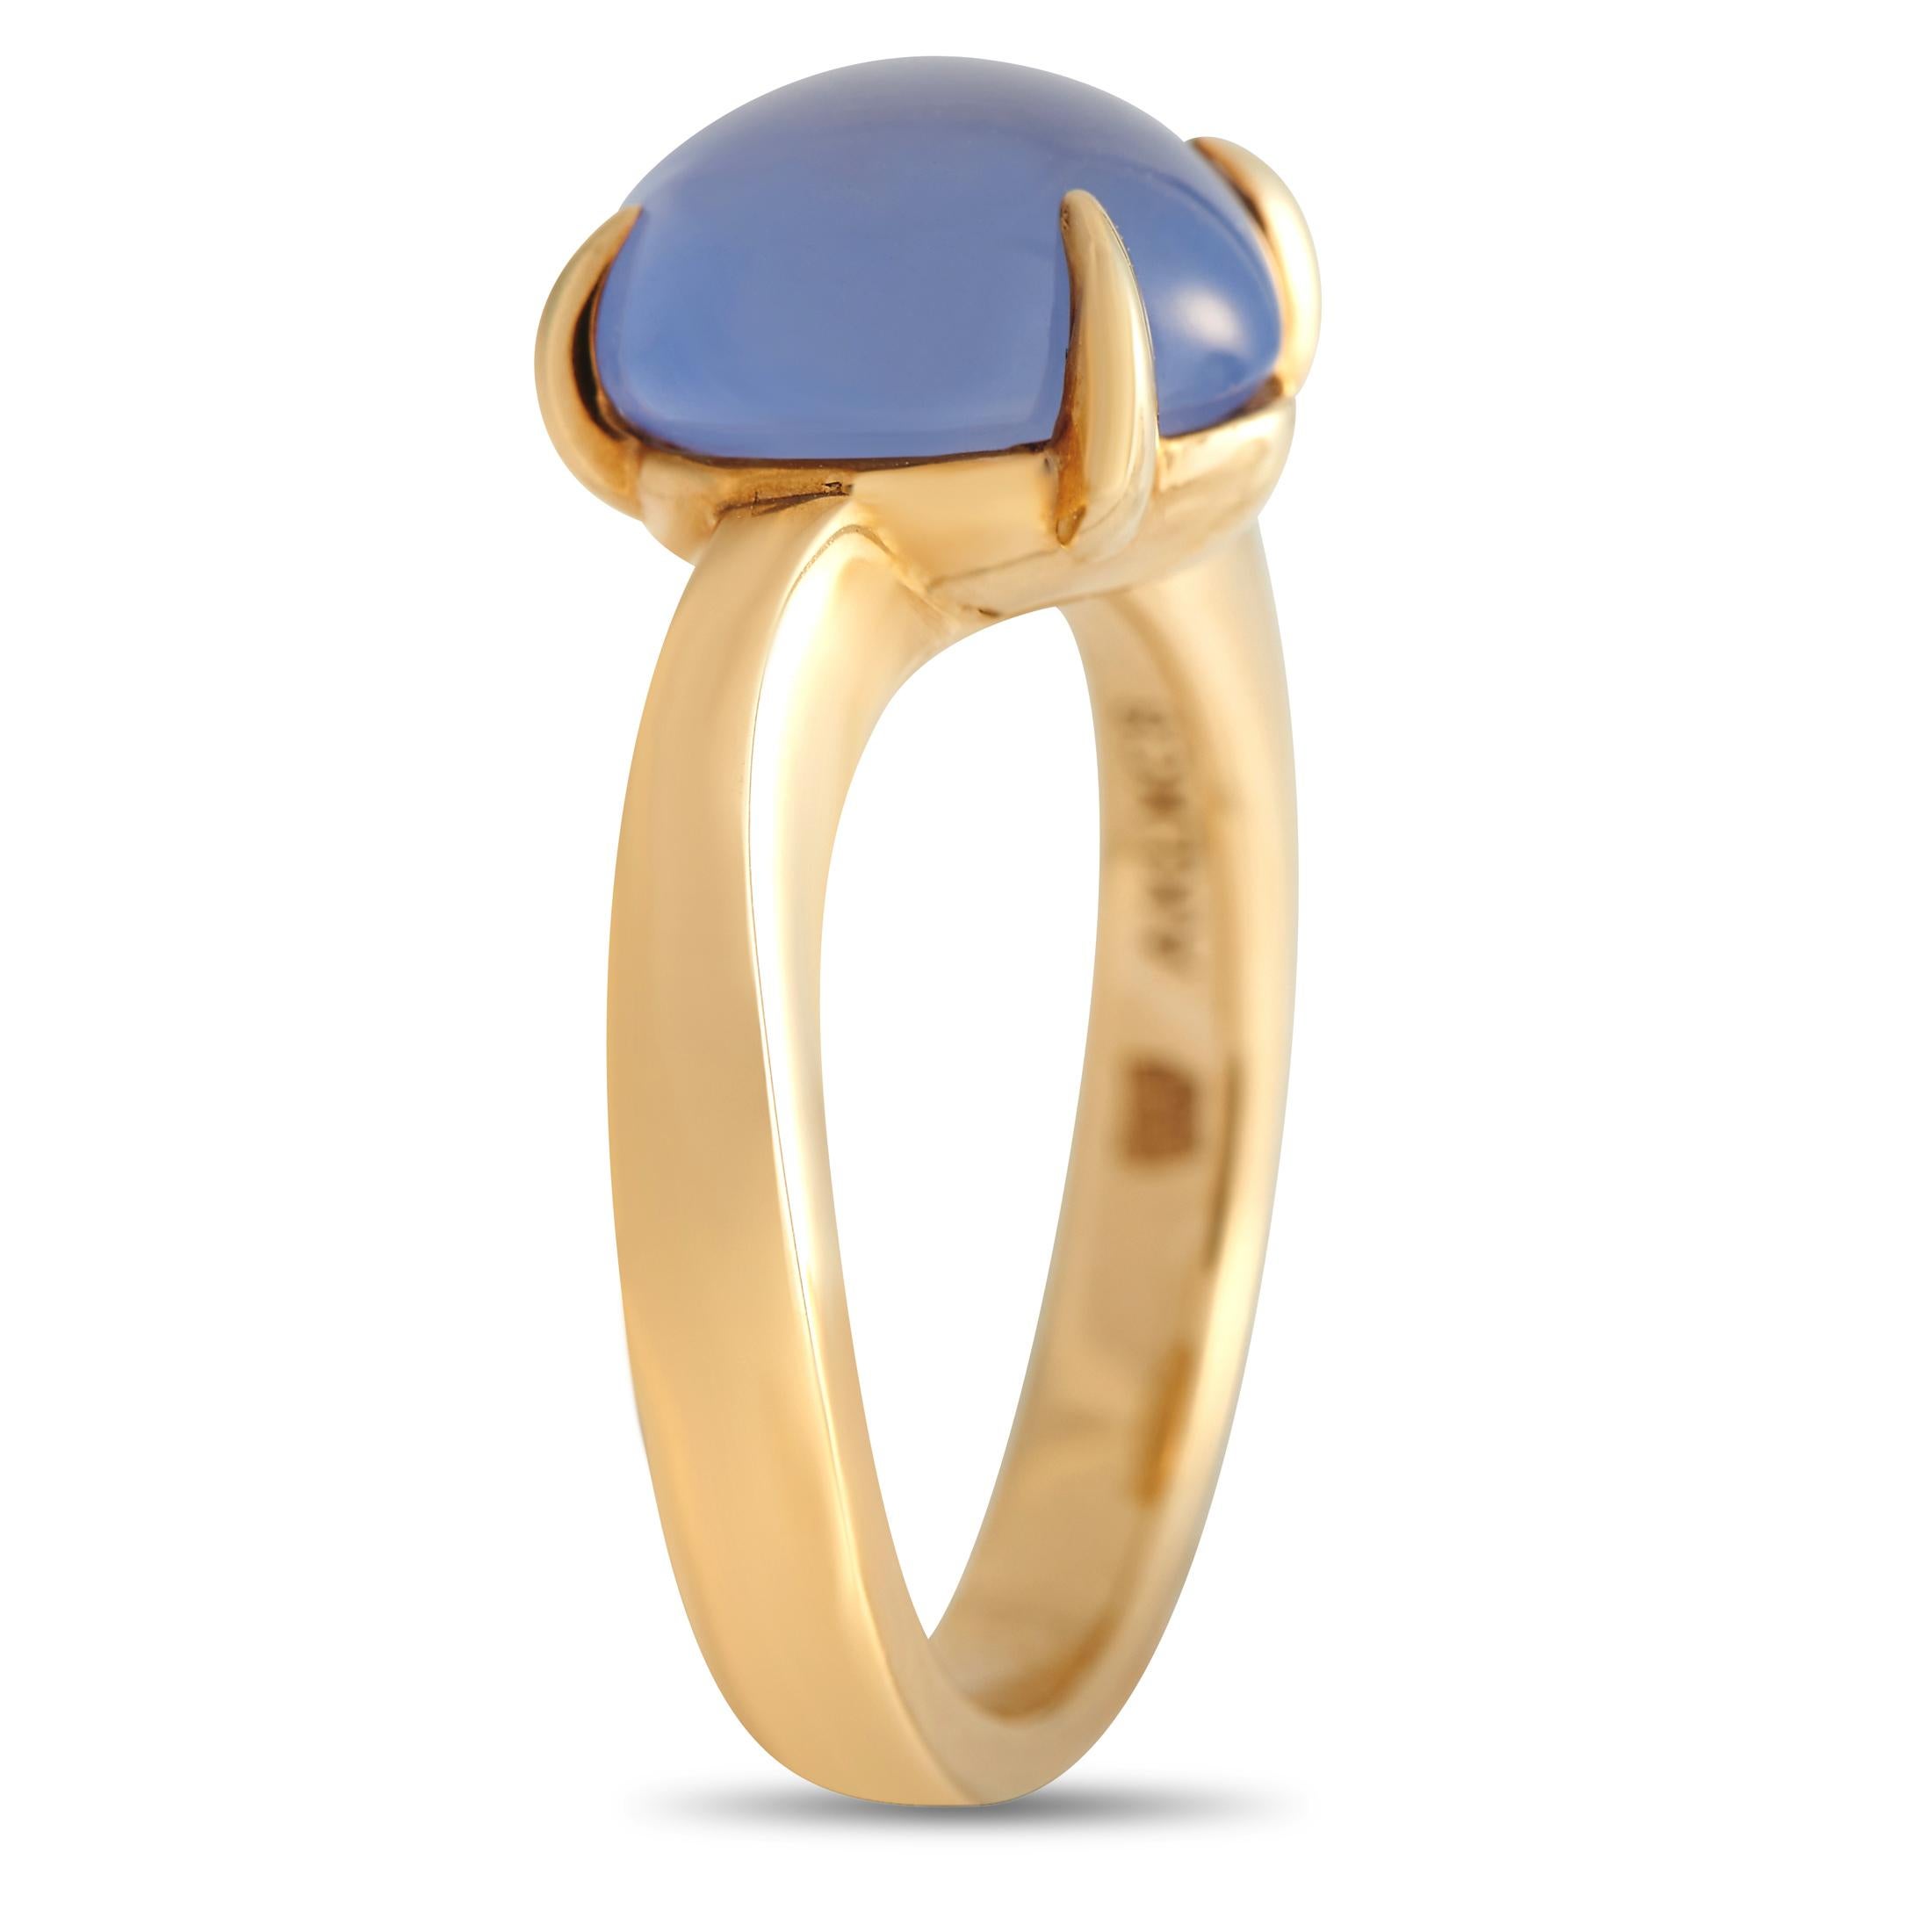 A lovely amethyst gemstone makes this Bvlgari ring instantly captivating. Elegant and understated, this piece features a simple 18K yellow gold setting with a 3mm wide band and a 6mm top height.\r\nThis jewelry piece is offered in estate condition